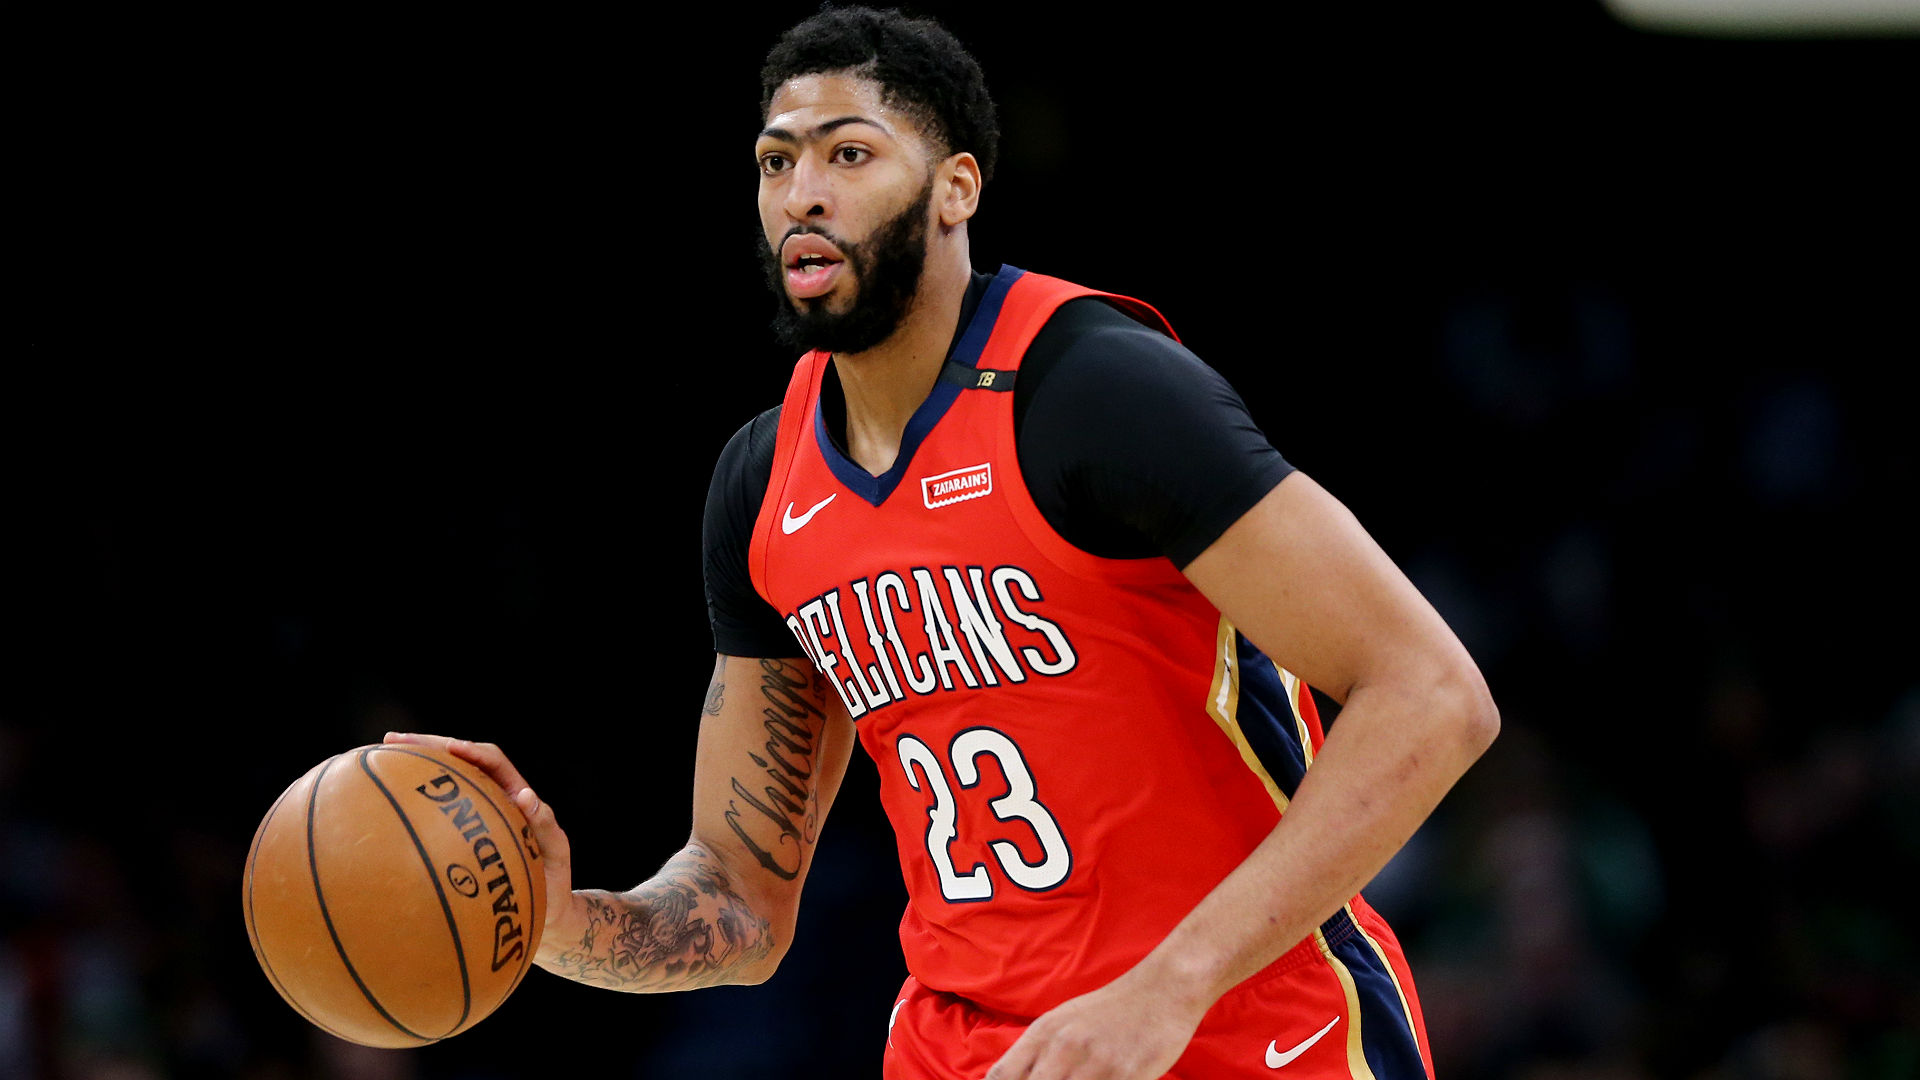 New Orleans Pelicans star Anthony Davis suffered a shoulder injury in the NBA.